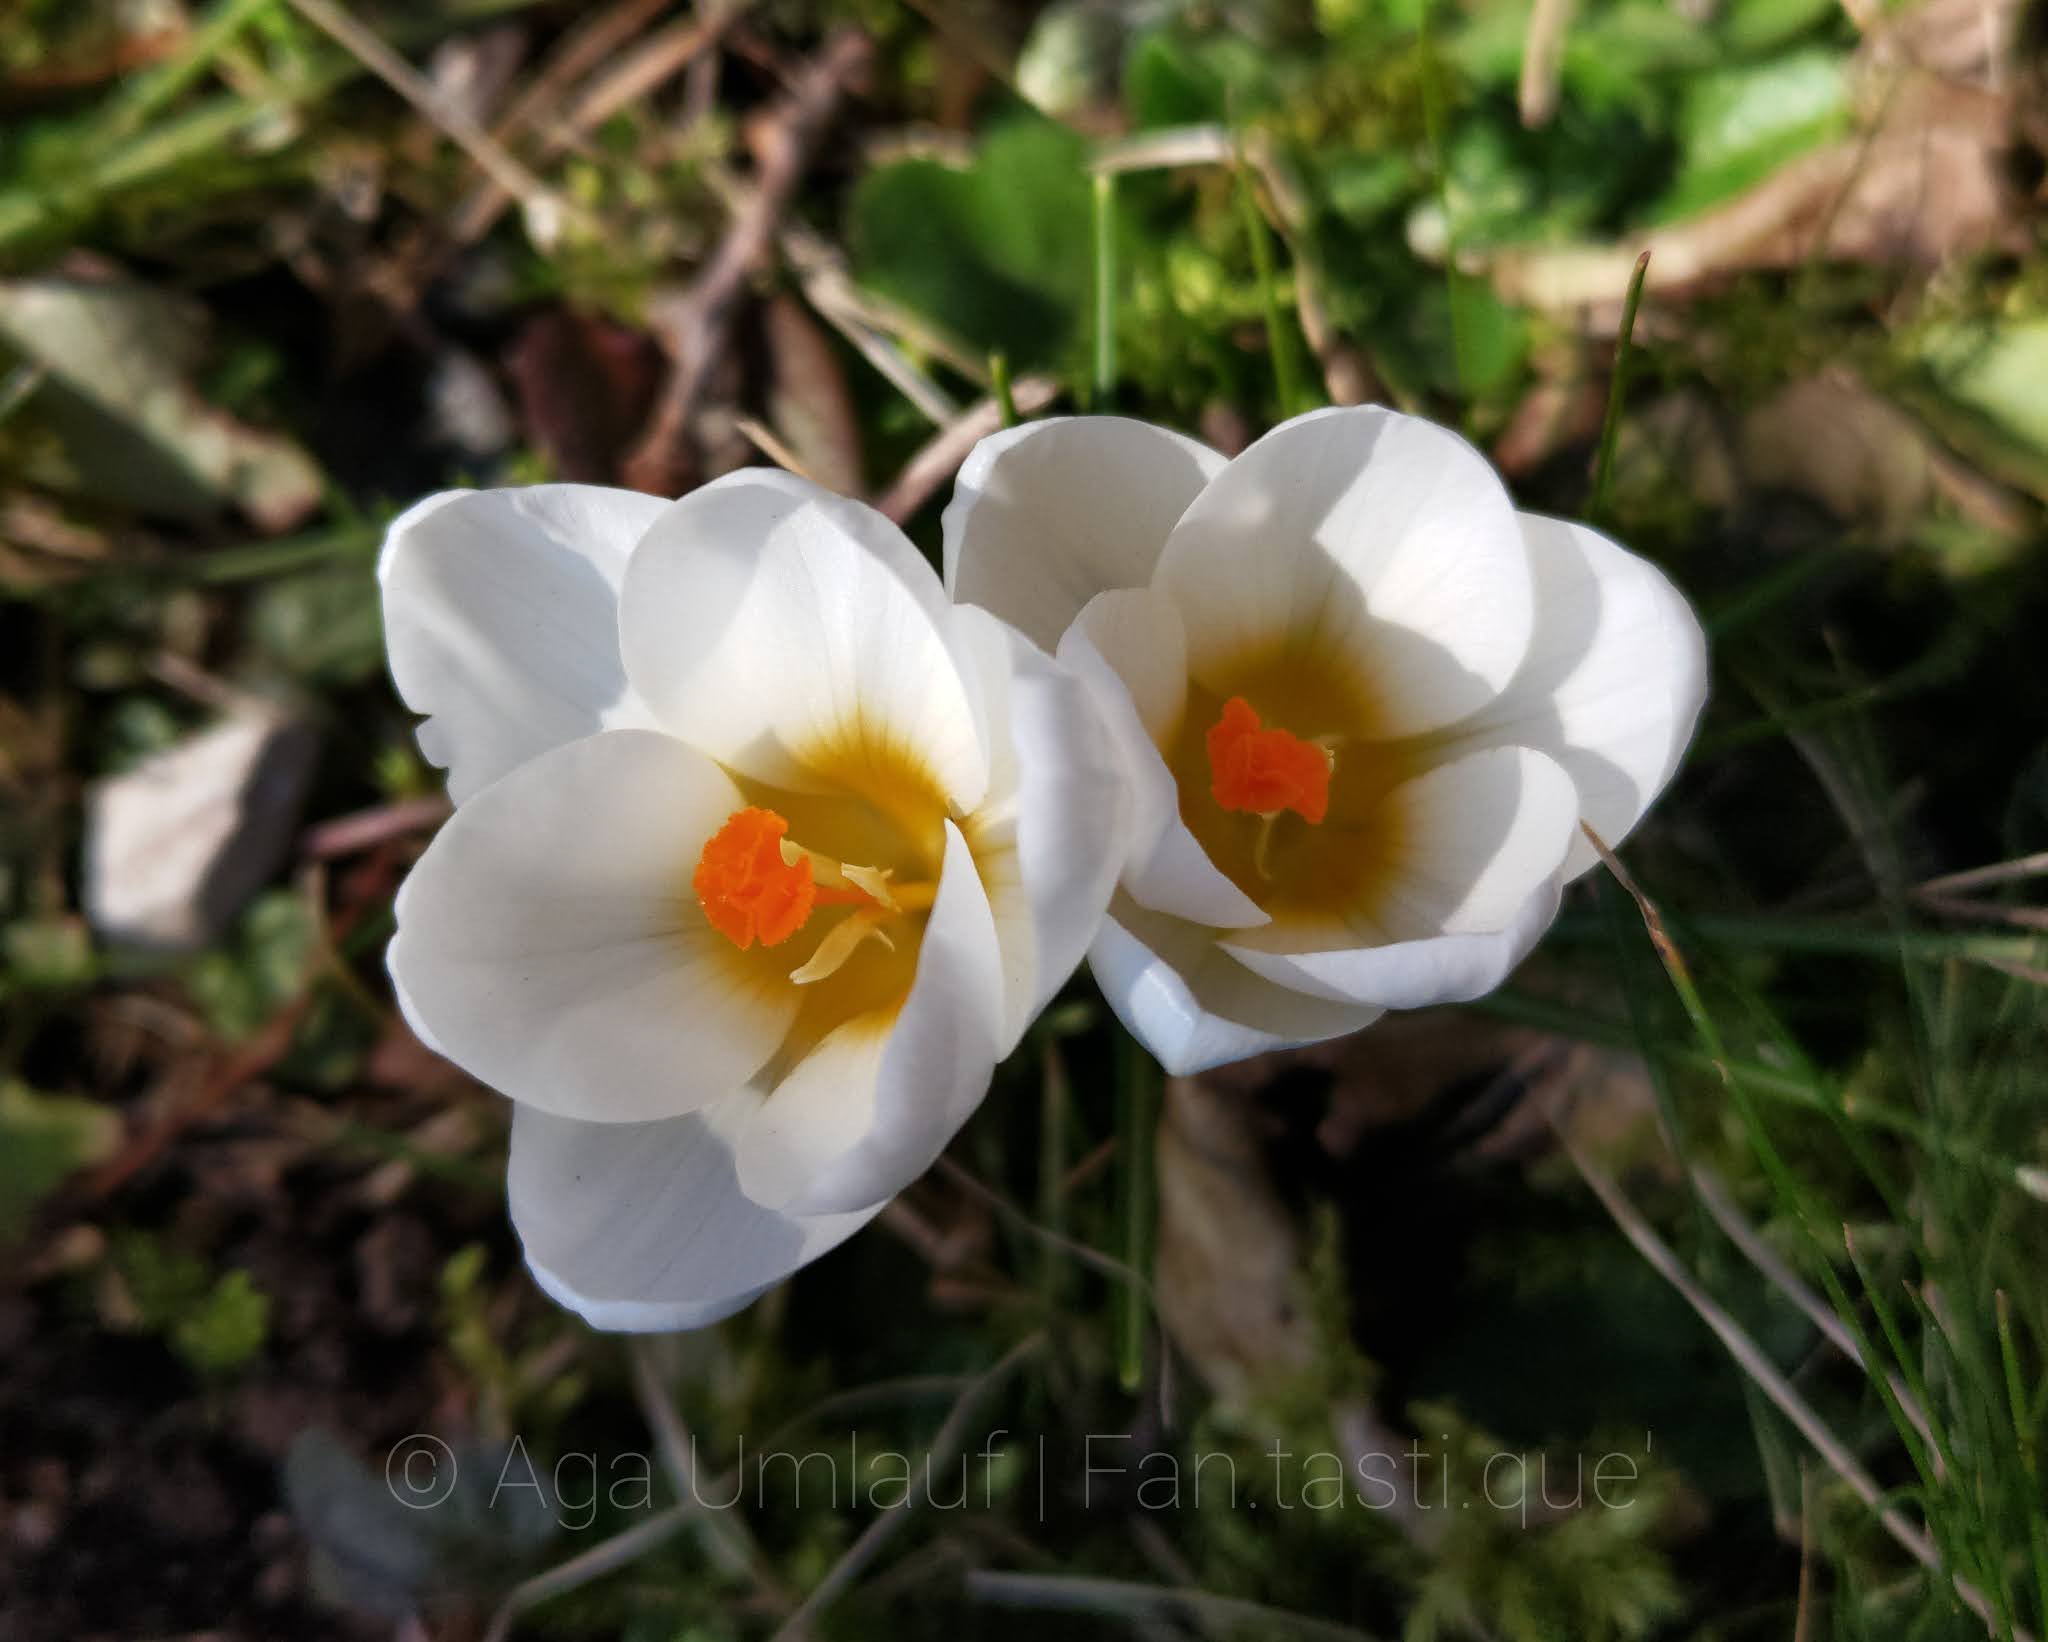 Close-up photography of two spring crocus blossoms.